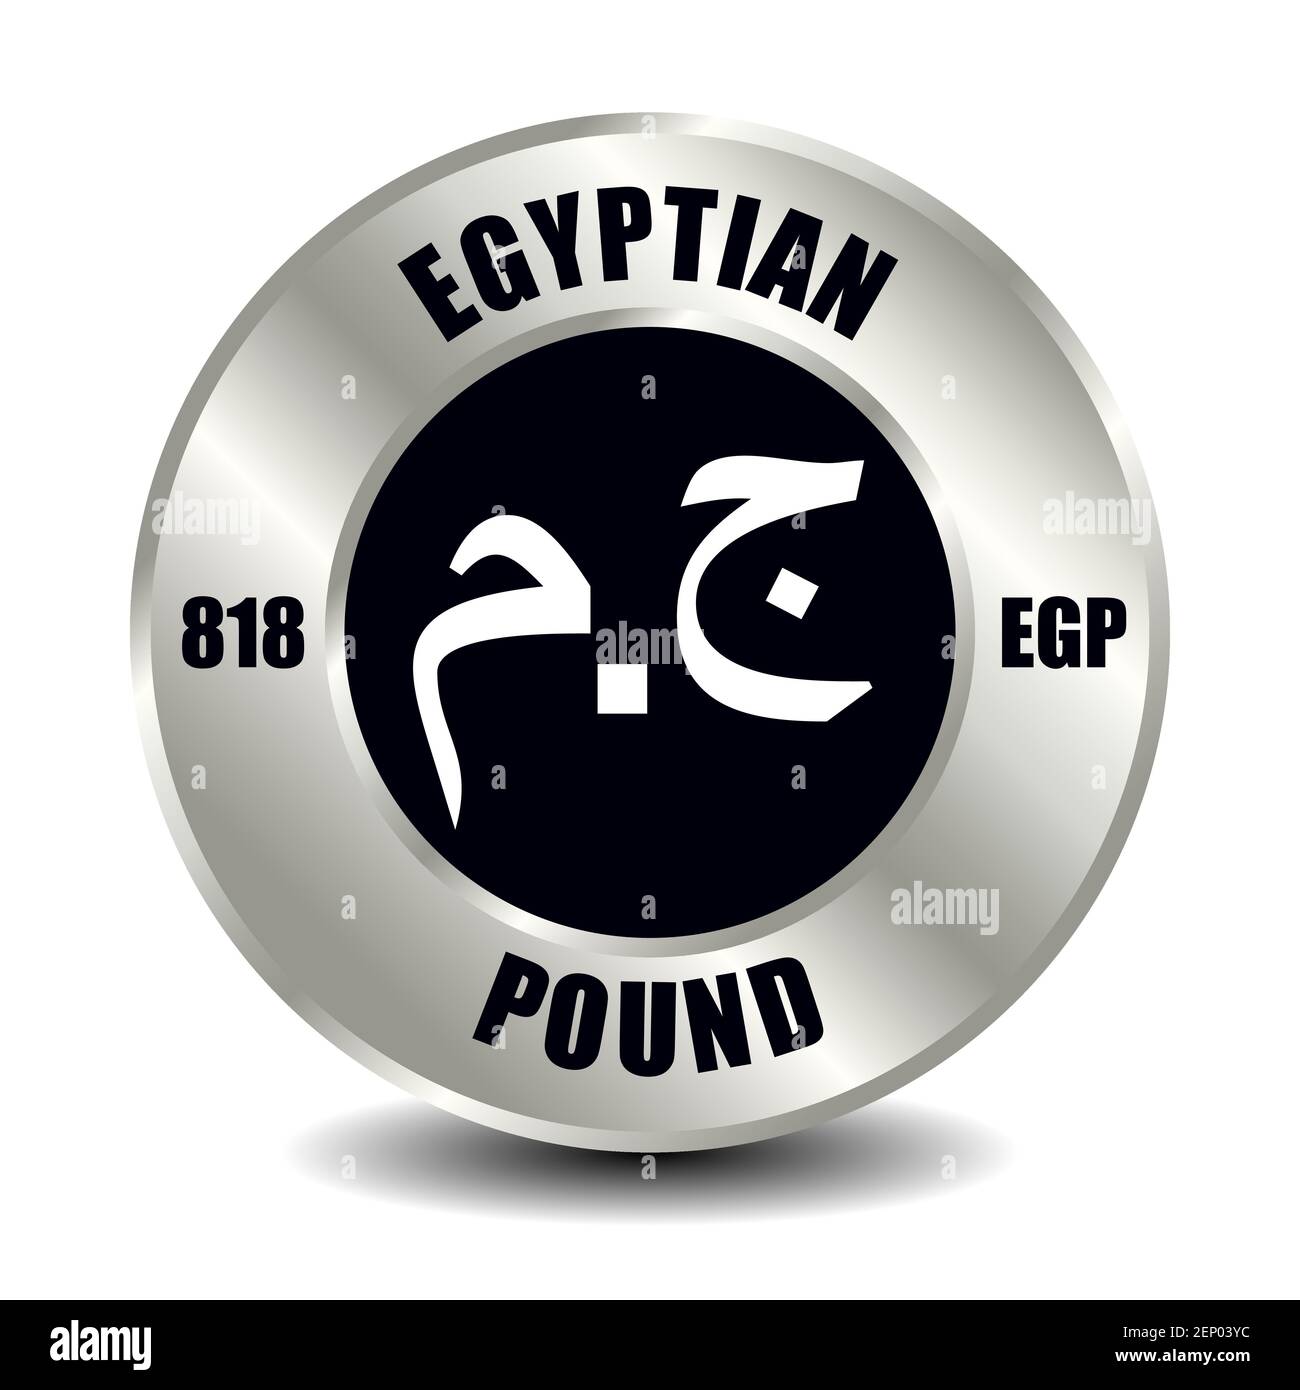 Egypt money icon isolated on round silver coin. Vector sign of currency symbol with international ISO code and abbreviation Stock Vector